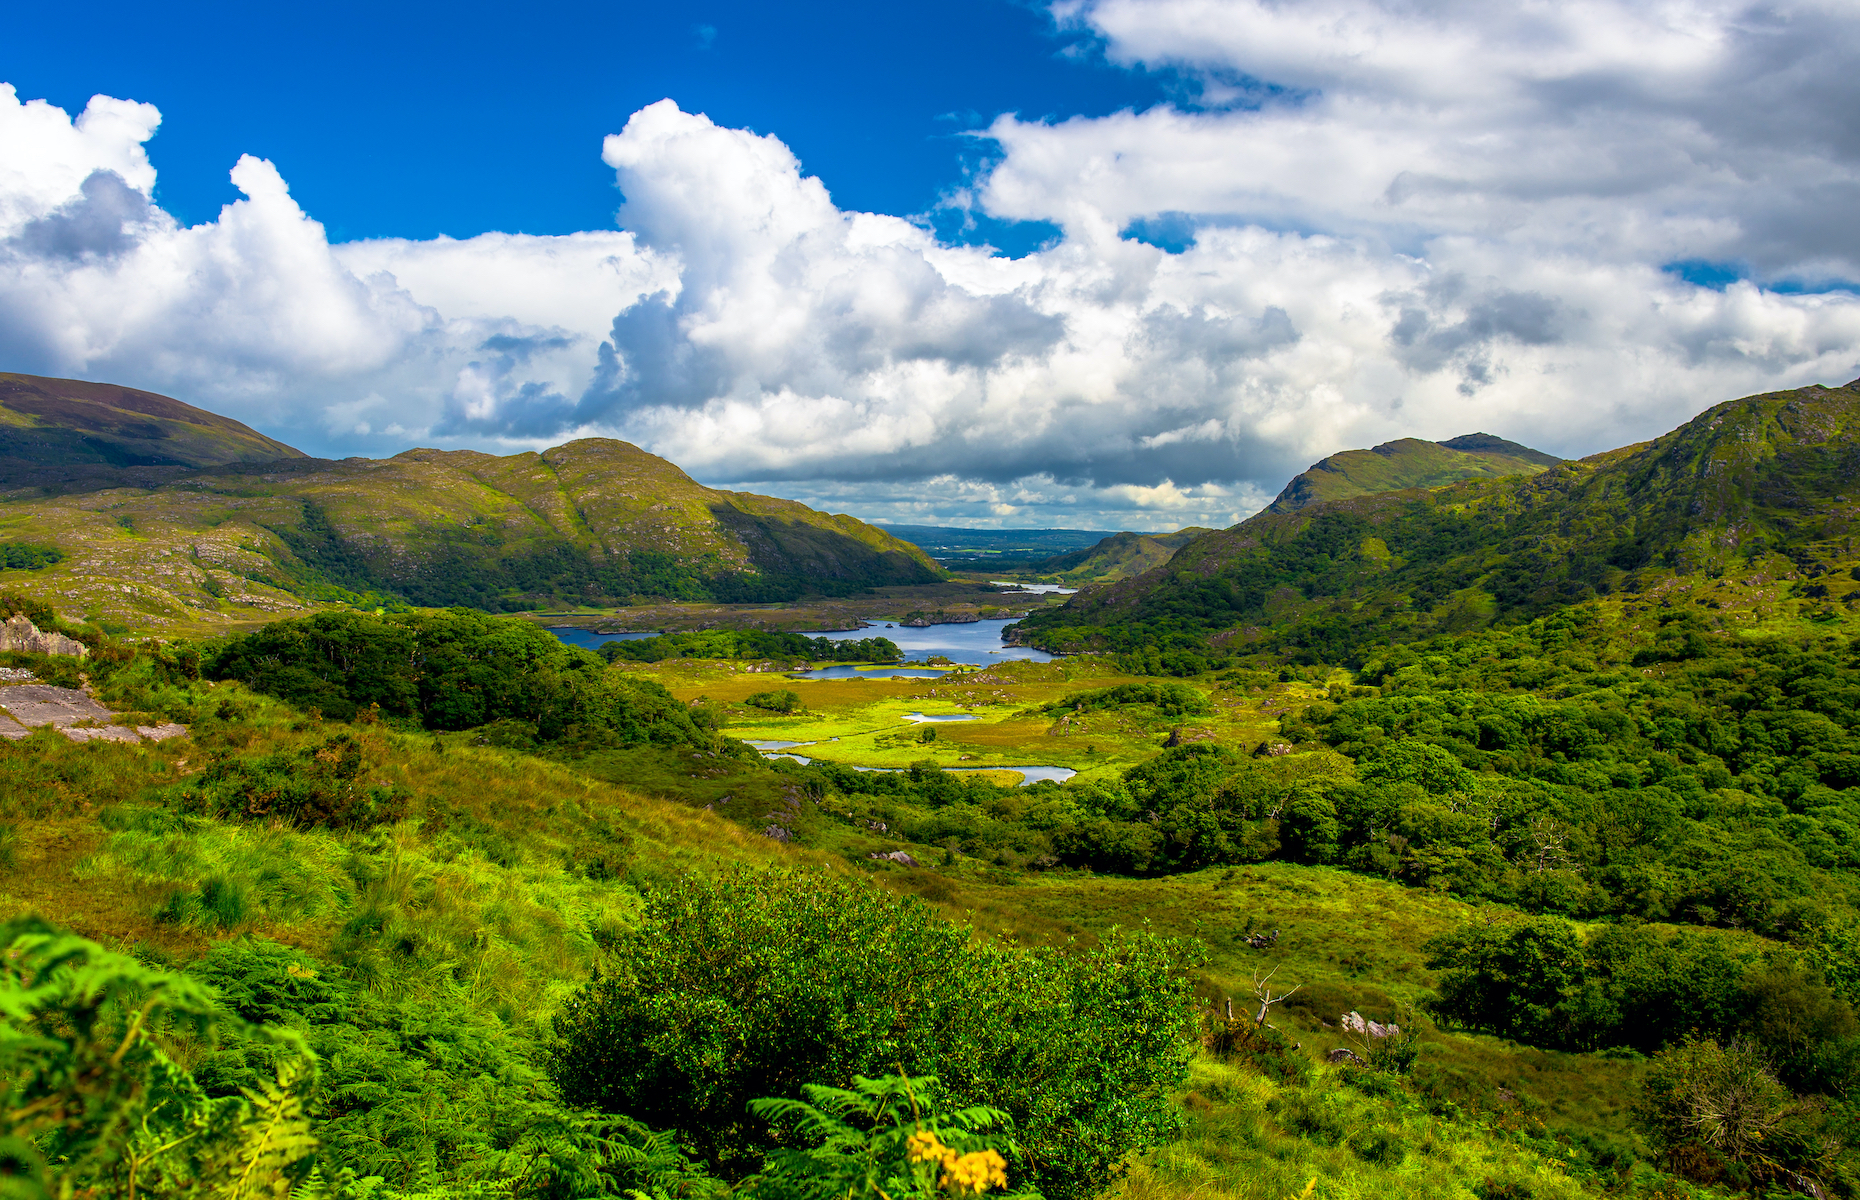 <p>Located in County Kerry, <a href="https://www.killarneynationalpark.ie/" rel="noreferrer noopener">Killarney National Park</a> is a must-see for nature lovers visiting Ireland. Covering more than 26,000 acres, this park is filled with sparkling lakes, majestic mountains, and lush forests. Numerous waterfalls also await along its extensive hiking trails.</p>